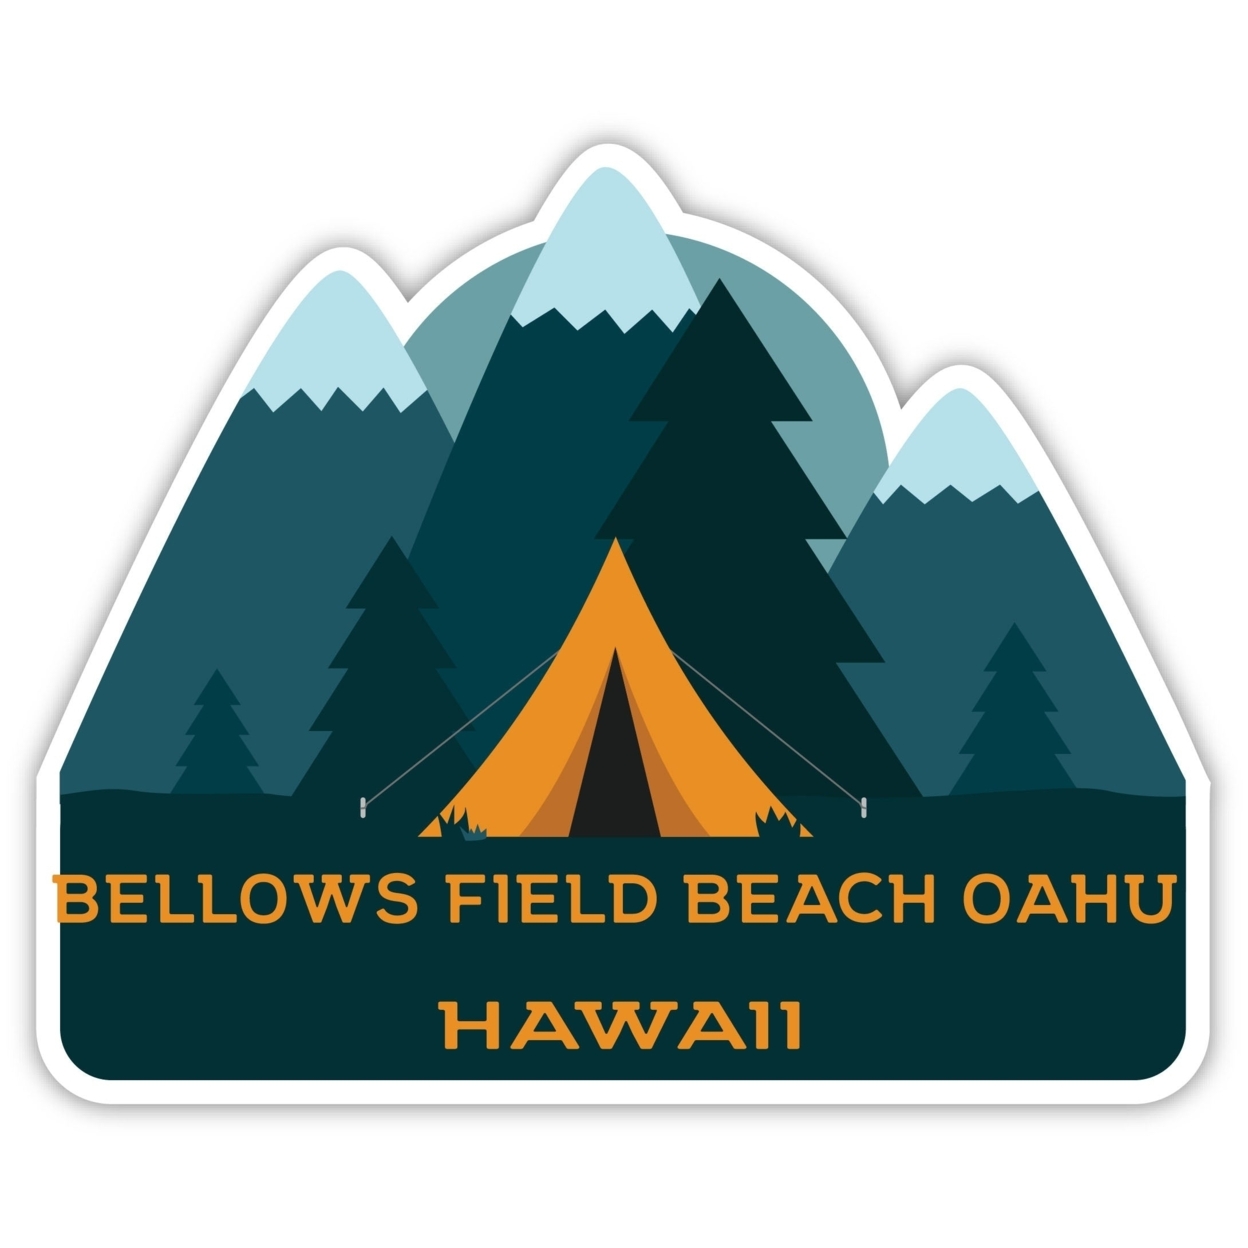 Bellows Field Beach Oahu Hawaii Souvenir Decorative Stickers (Choose Theme And Size) - 4-Pack, 10-Inch, Tent